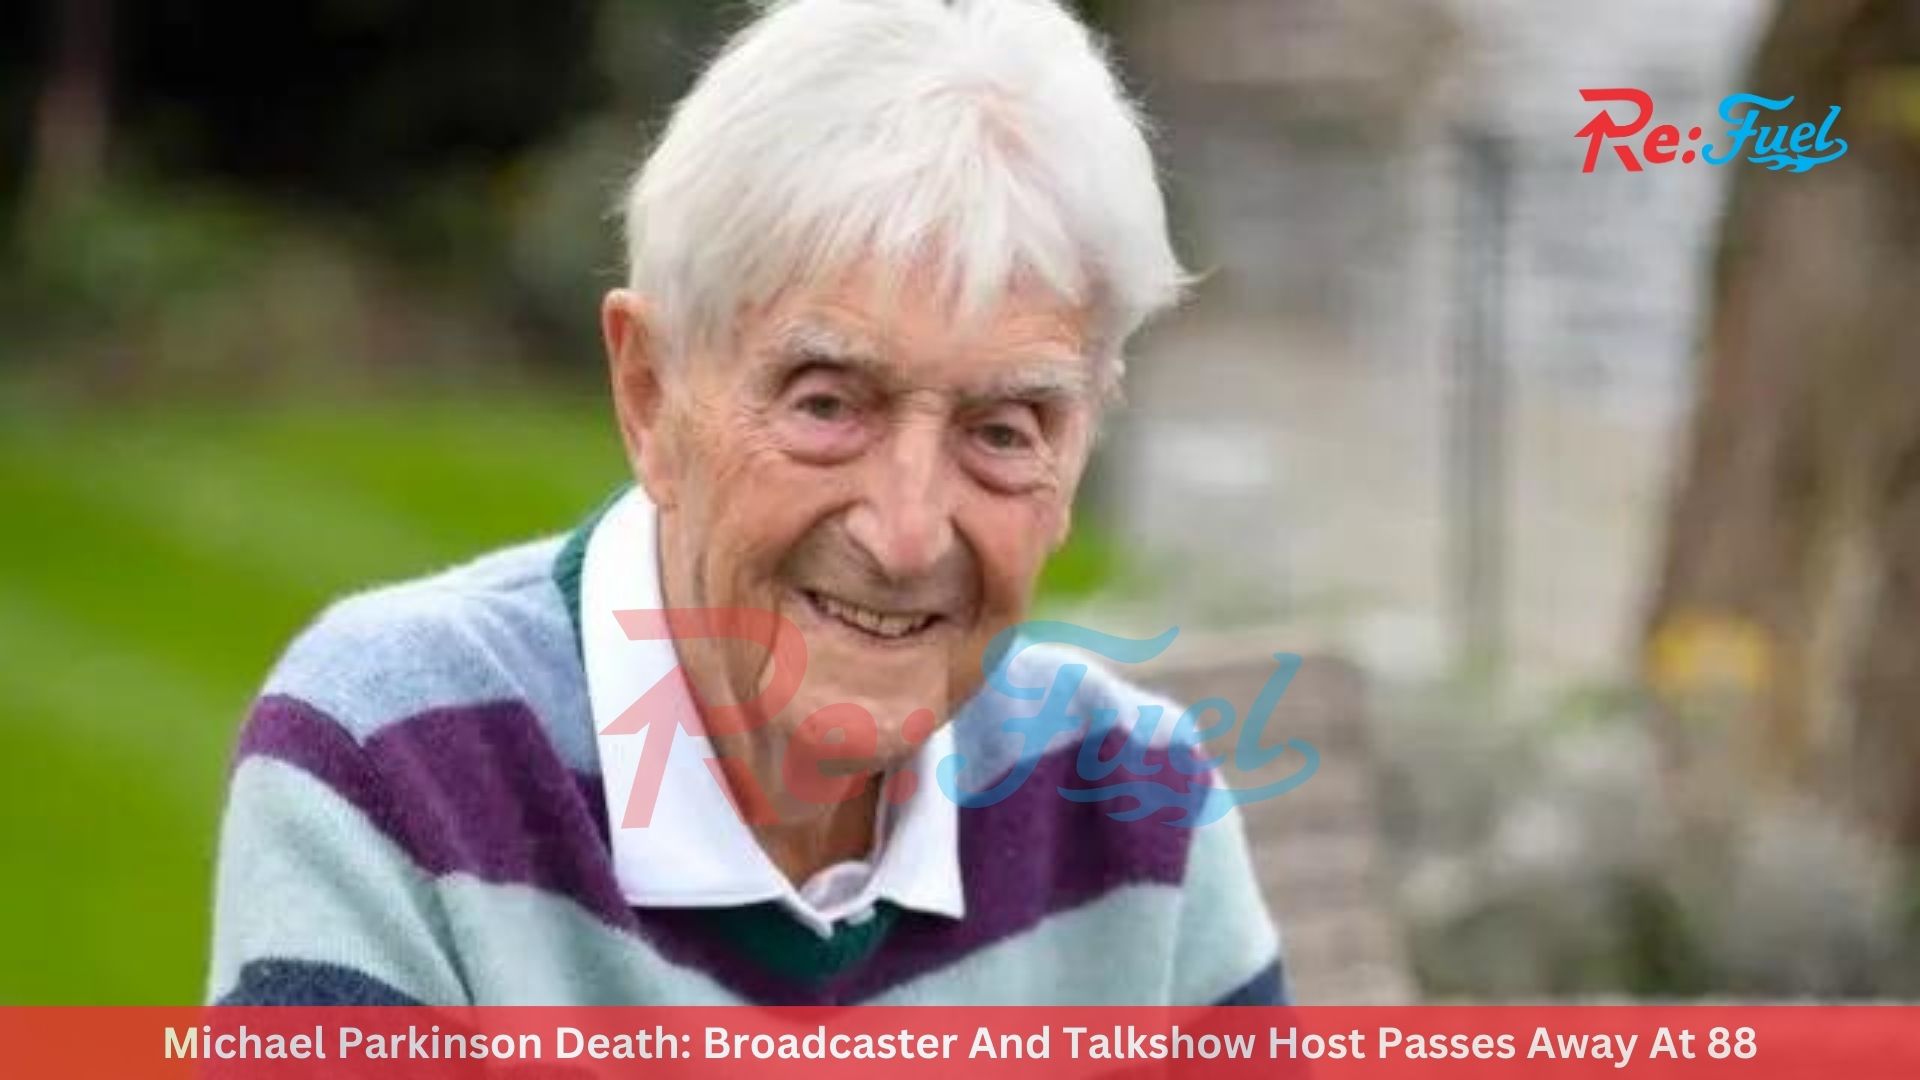 Michael Parkinson Death: Broadcaster And Talkshow Host Passes Away At 88